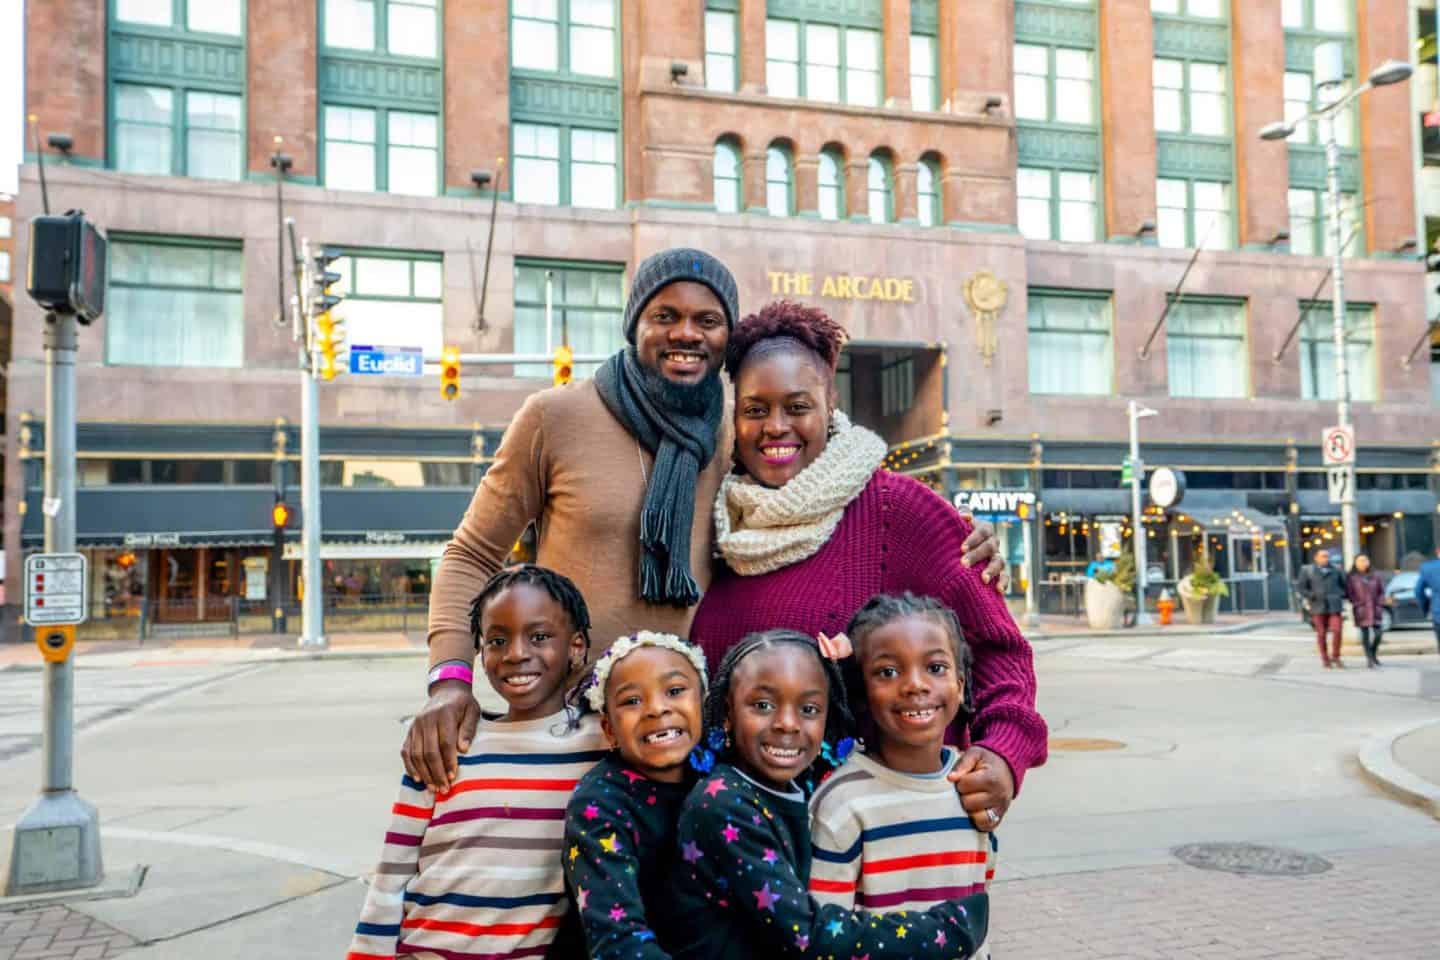 Black Family Travel Things To Do In Cleveland With Kids black kids traveling black families photoshoot black families travel Cleveland Itinerary 88